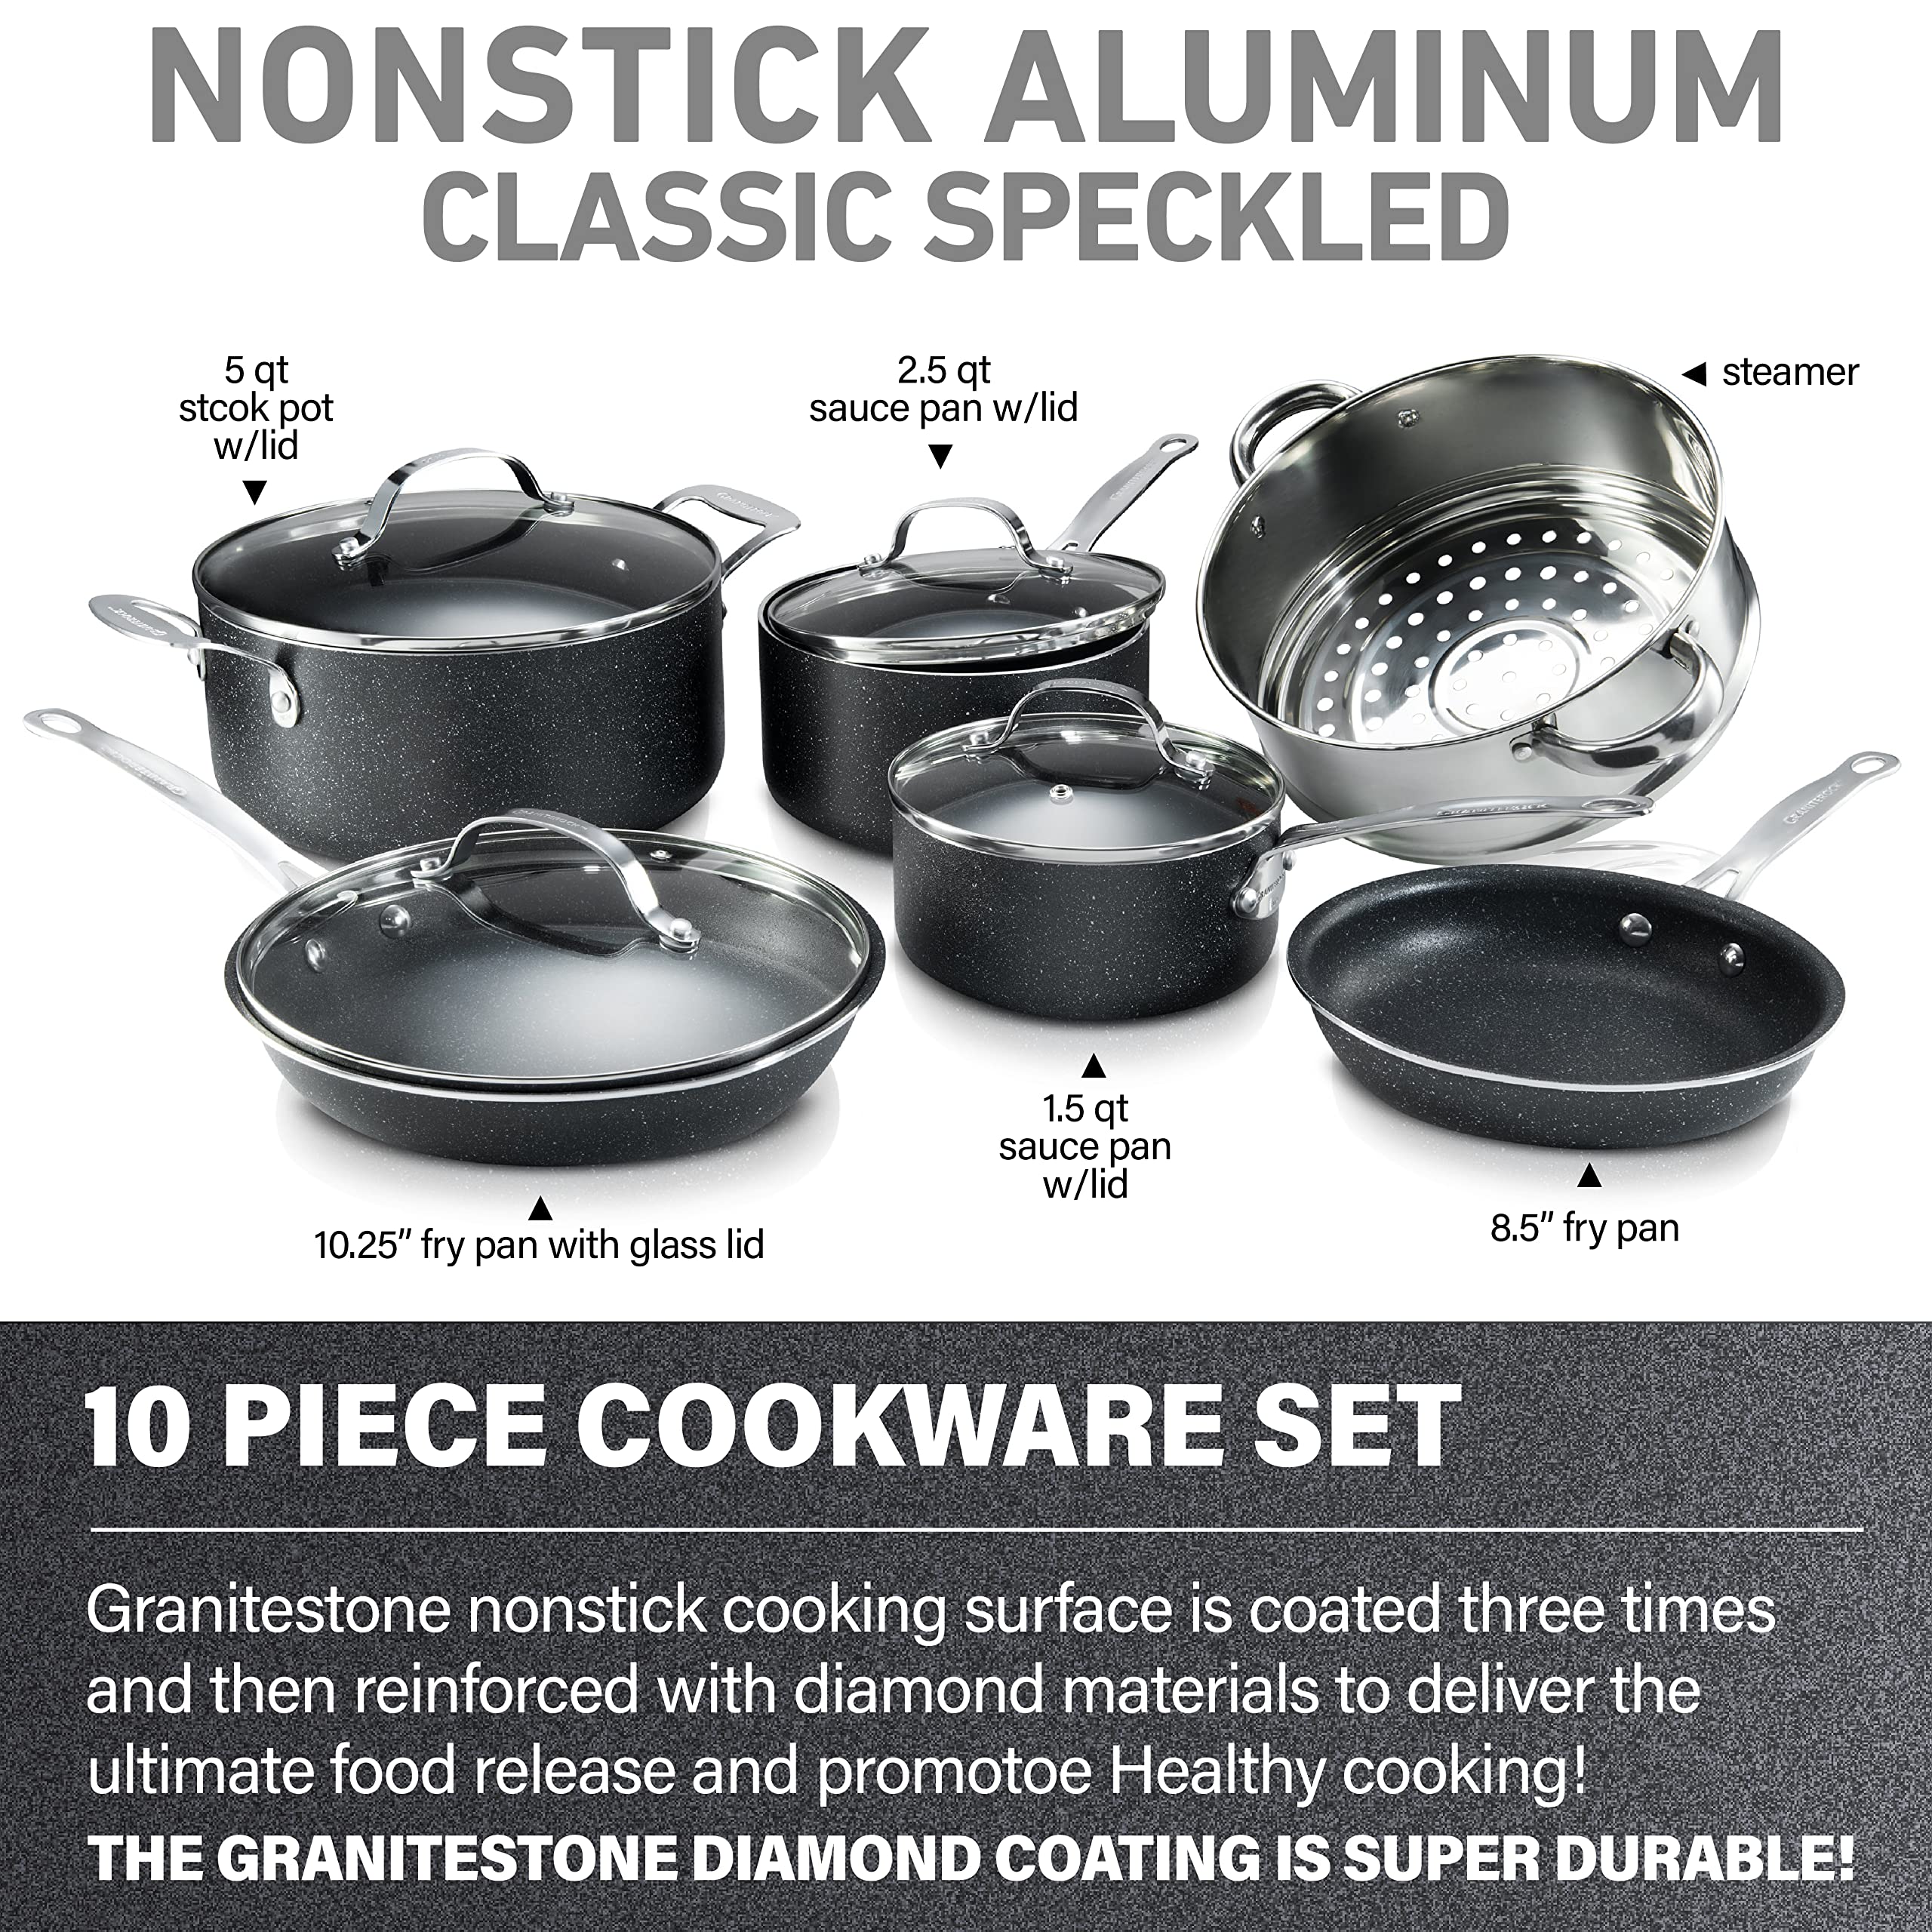 Granitestone Original 10 Piece Nonstick Cookware Set, Scratch-Resistant, Granite-Coated, Dishwasher and Oven-Safe Kitchenware, PFOA-Free Pots and Pans As Seen On TV